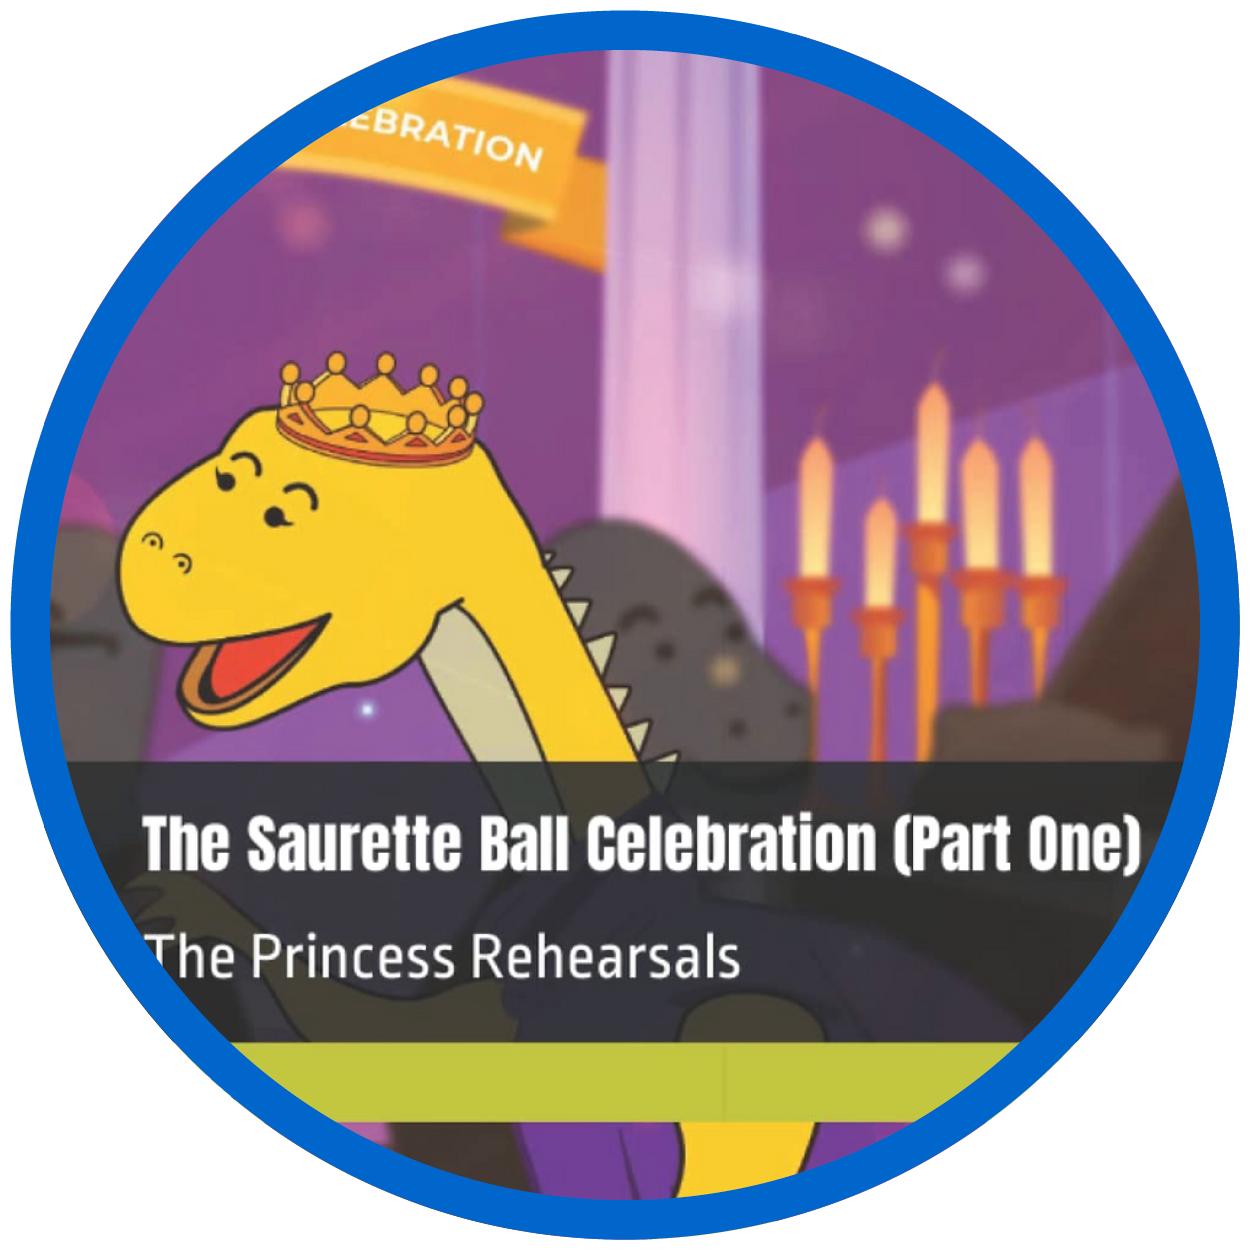 Book cover with "The Saurette Ball Celebration (Part One), The Princess Rehearsals" with a yellow dinosaur wearing a crown against a purple candlelit background.